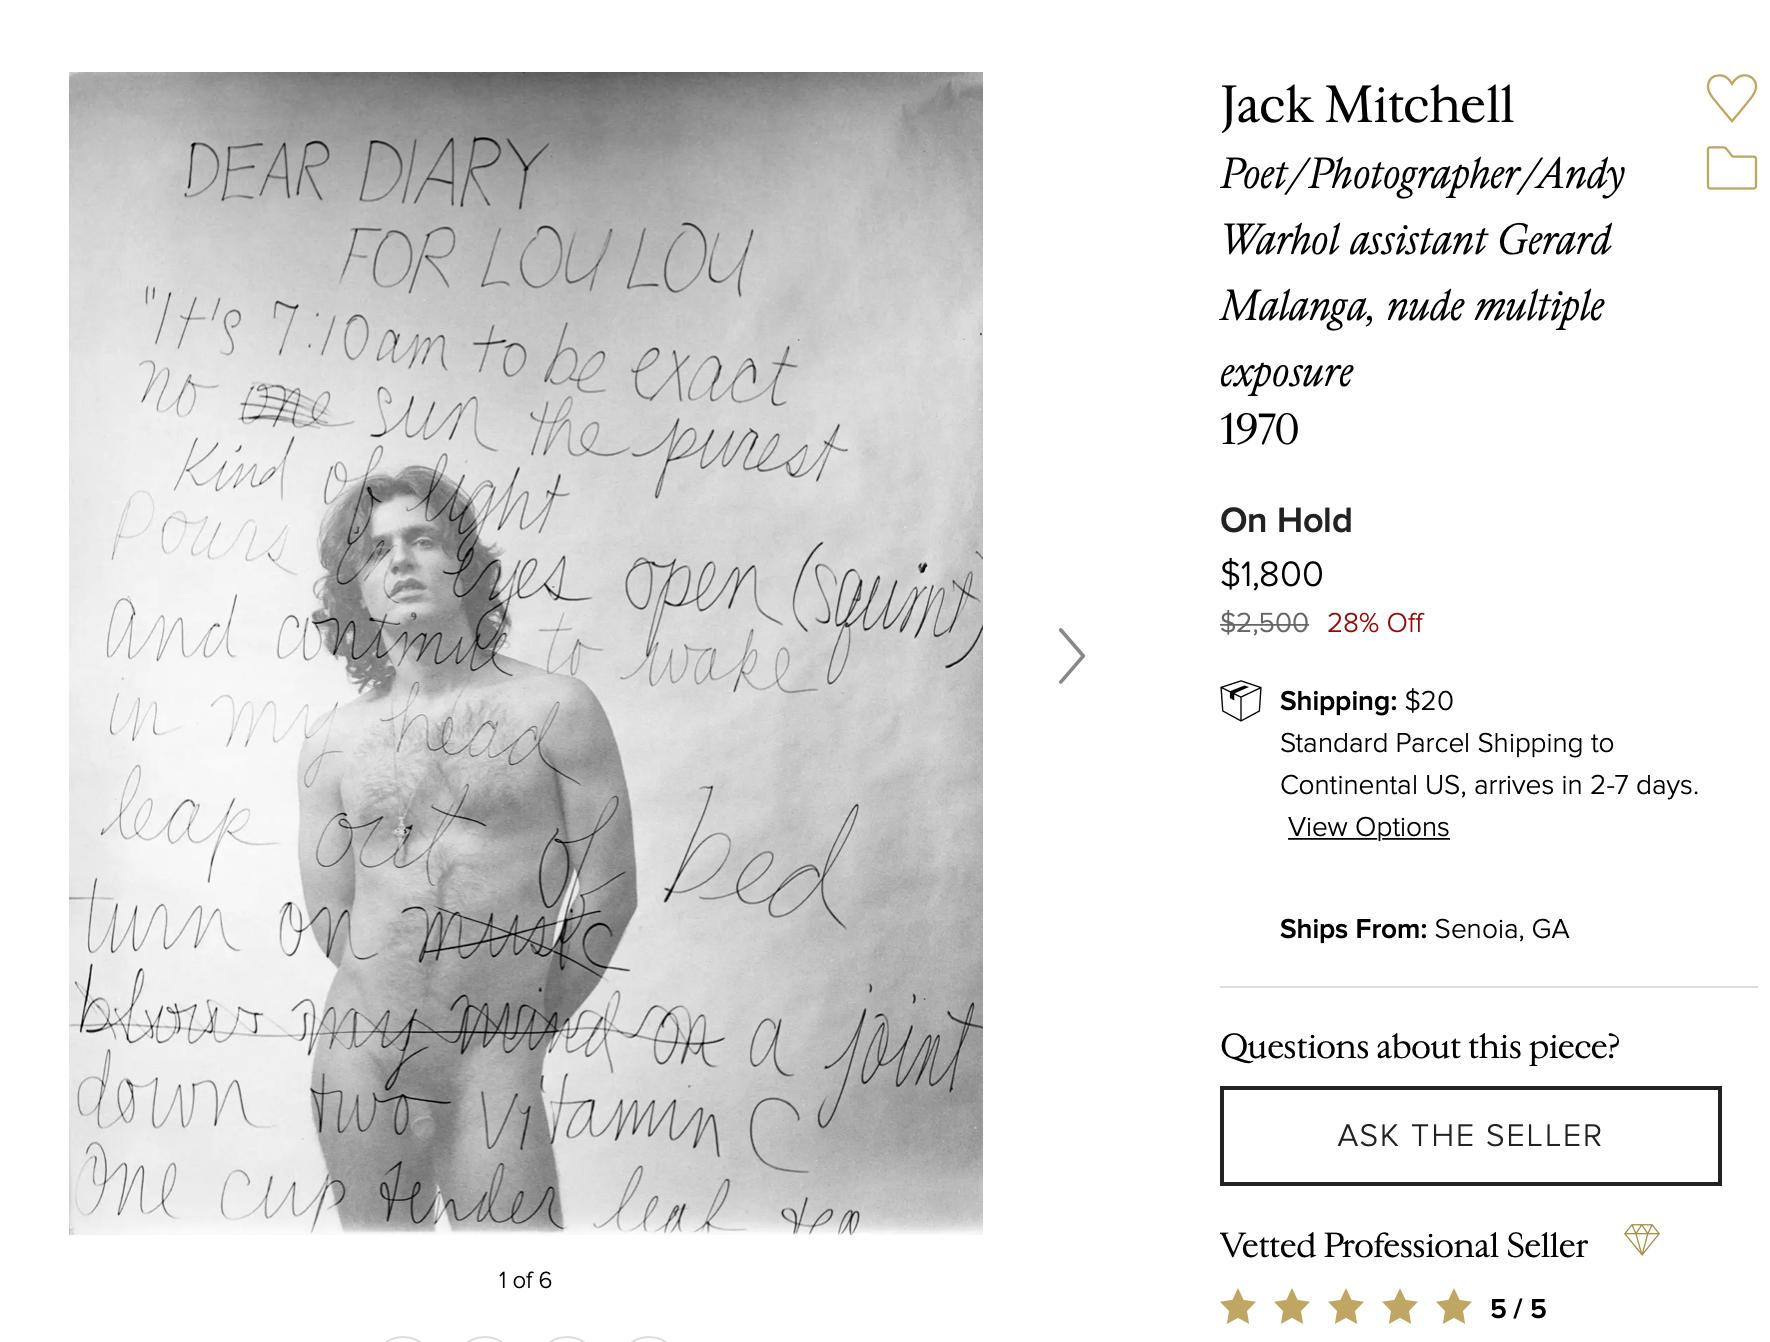 Four Warhol-Related Vintage Jack Mitchell Photographs On Hold For Customer 2